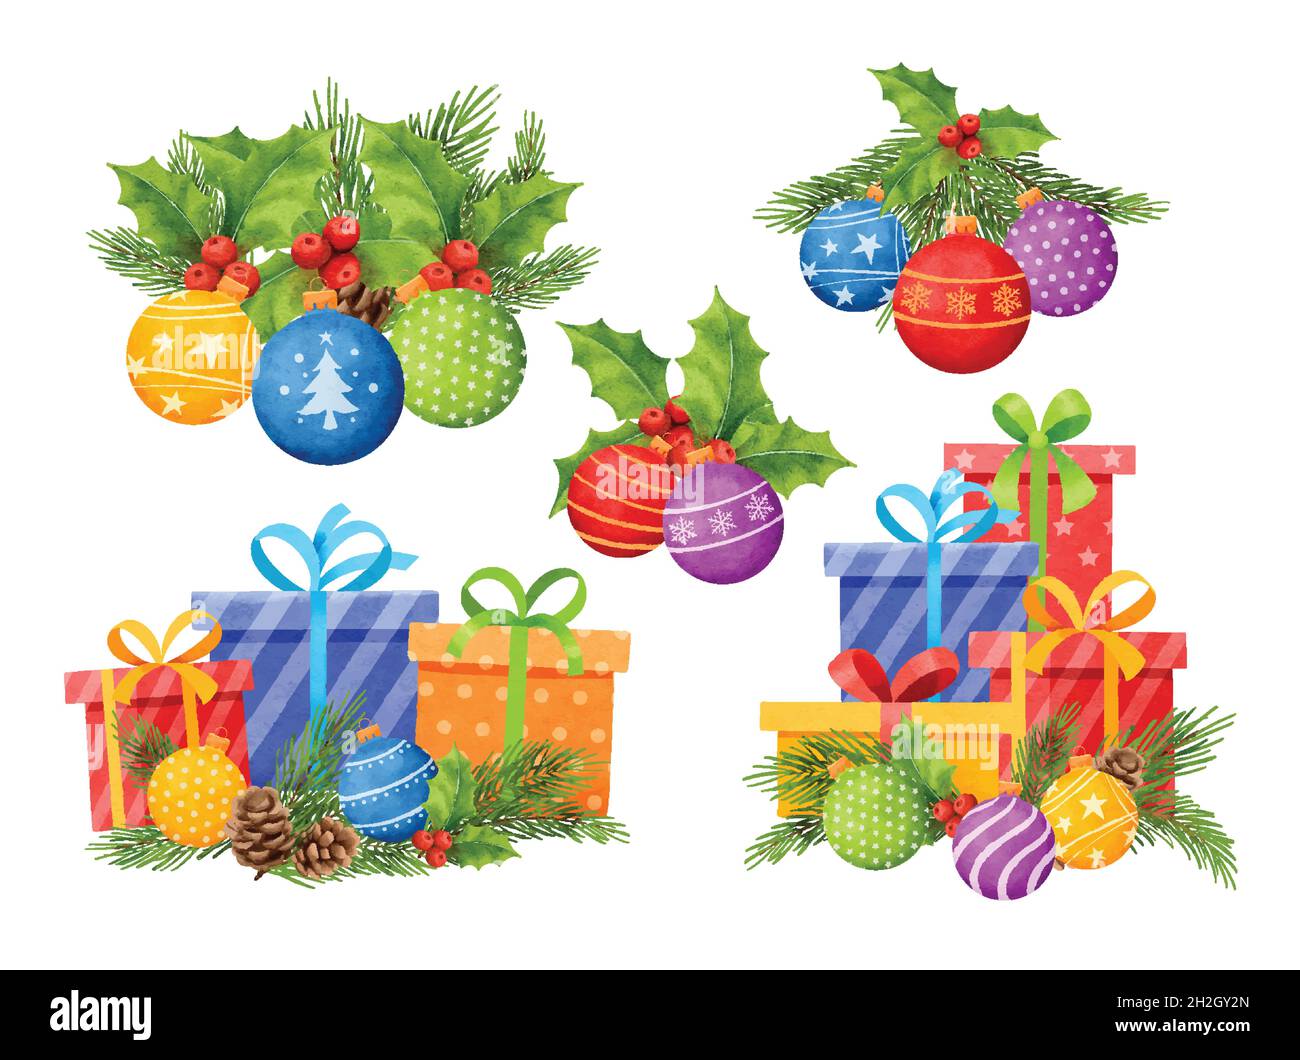 Christmas decoration watercolor style isolated on white background. Stock Vector